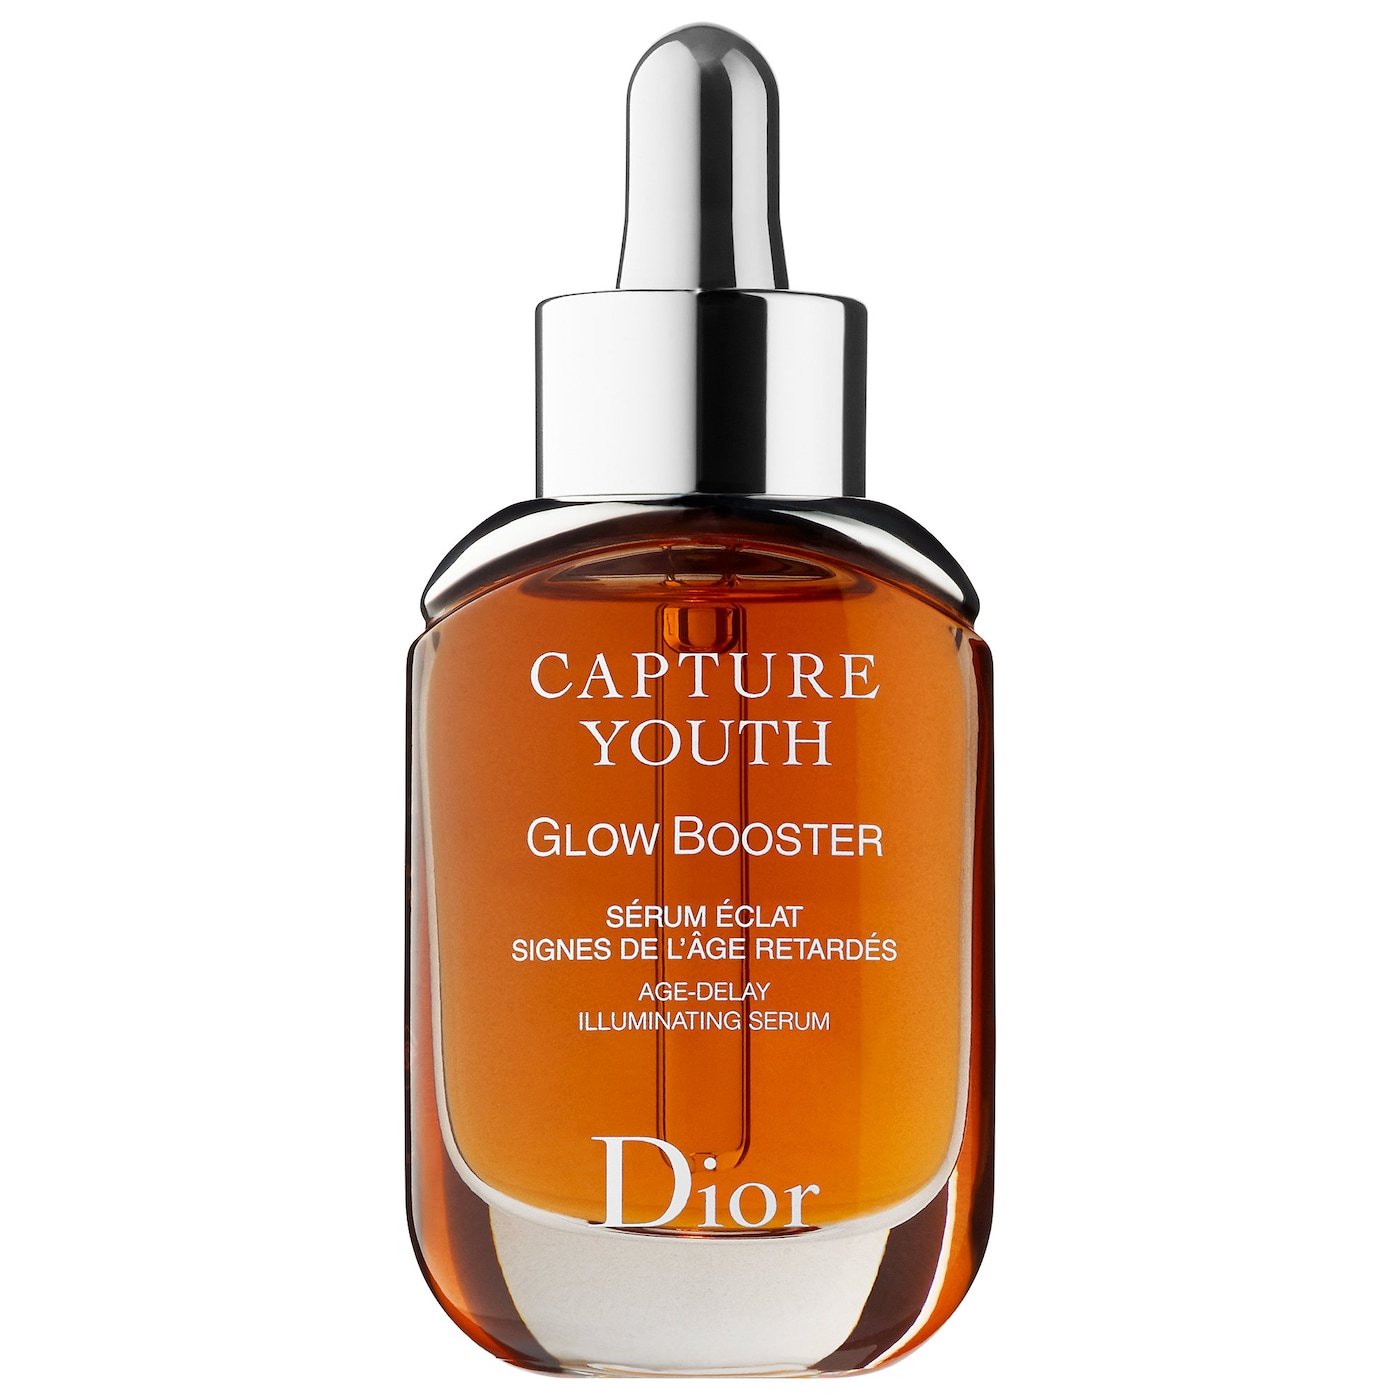 Dior Capture Youth Glow Booster Serum